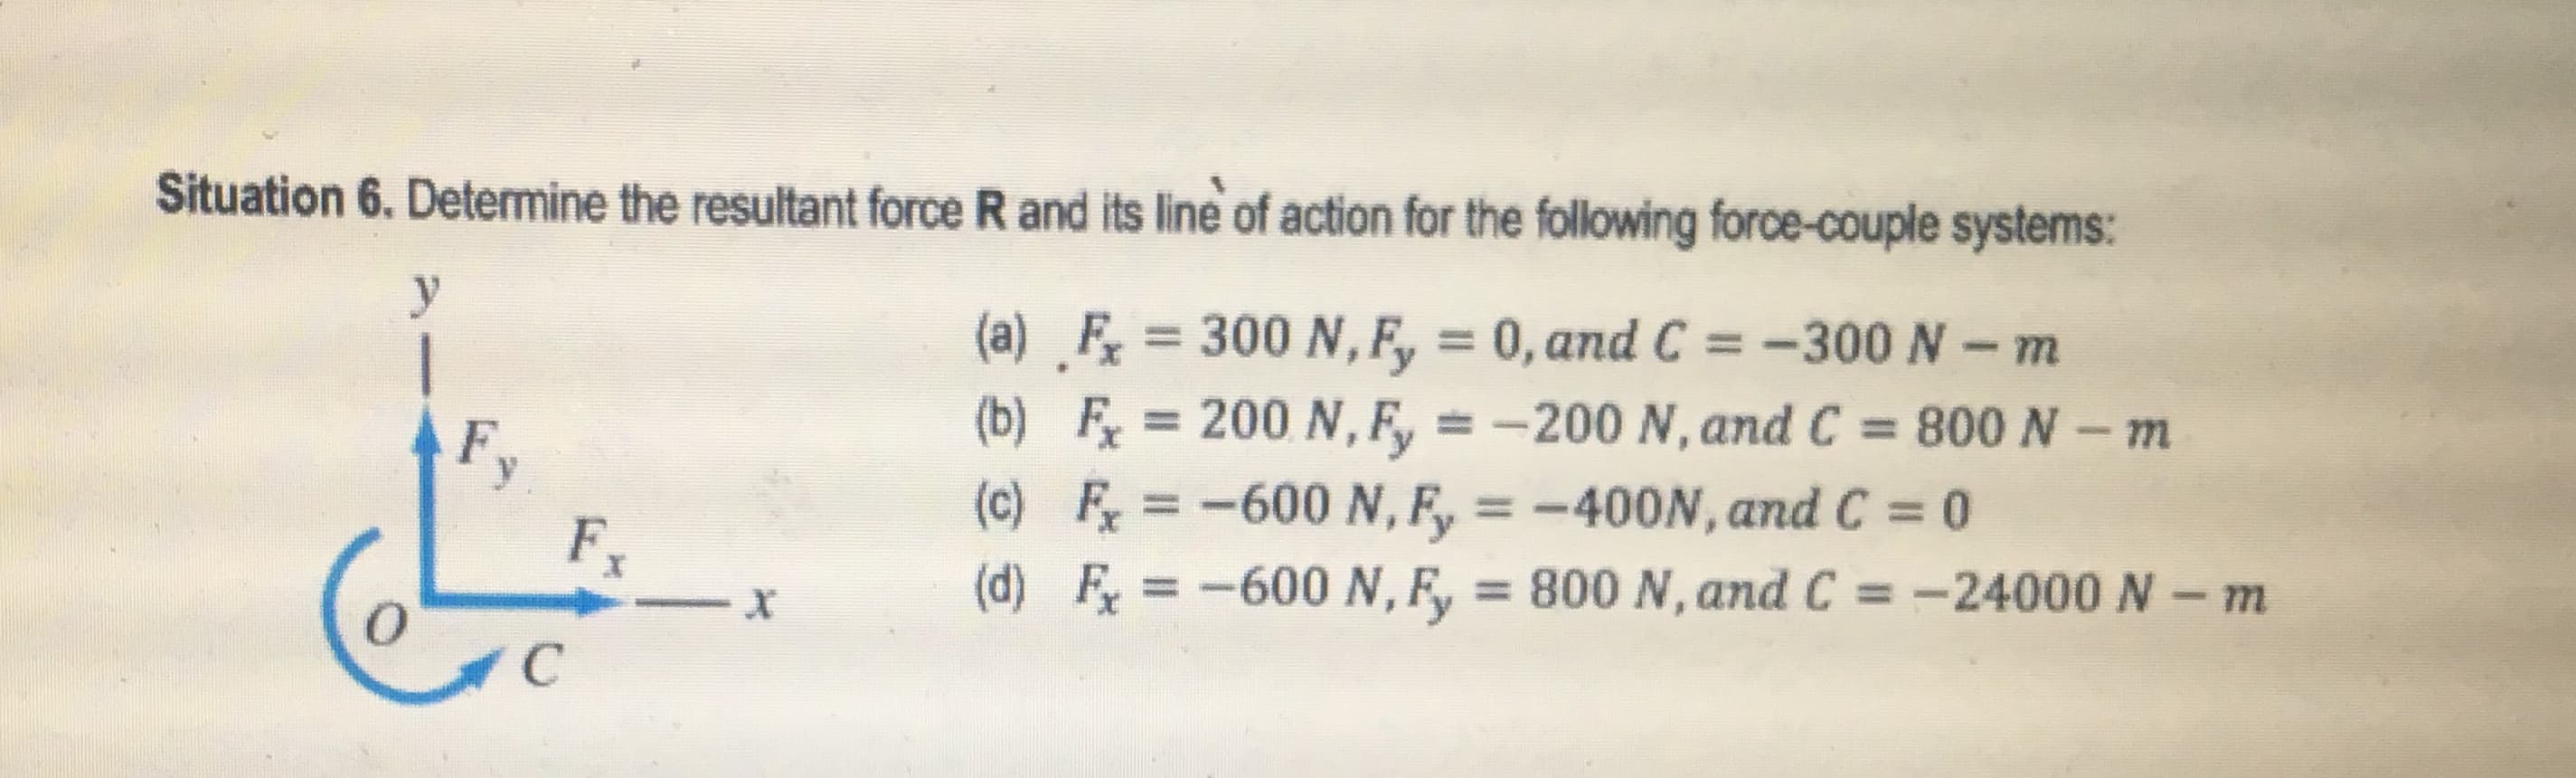 ation 6. Determine the resultant force R and its line of action for the following force-couple systems:
